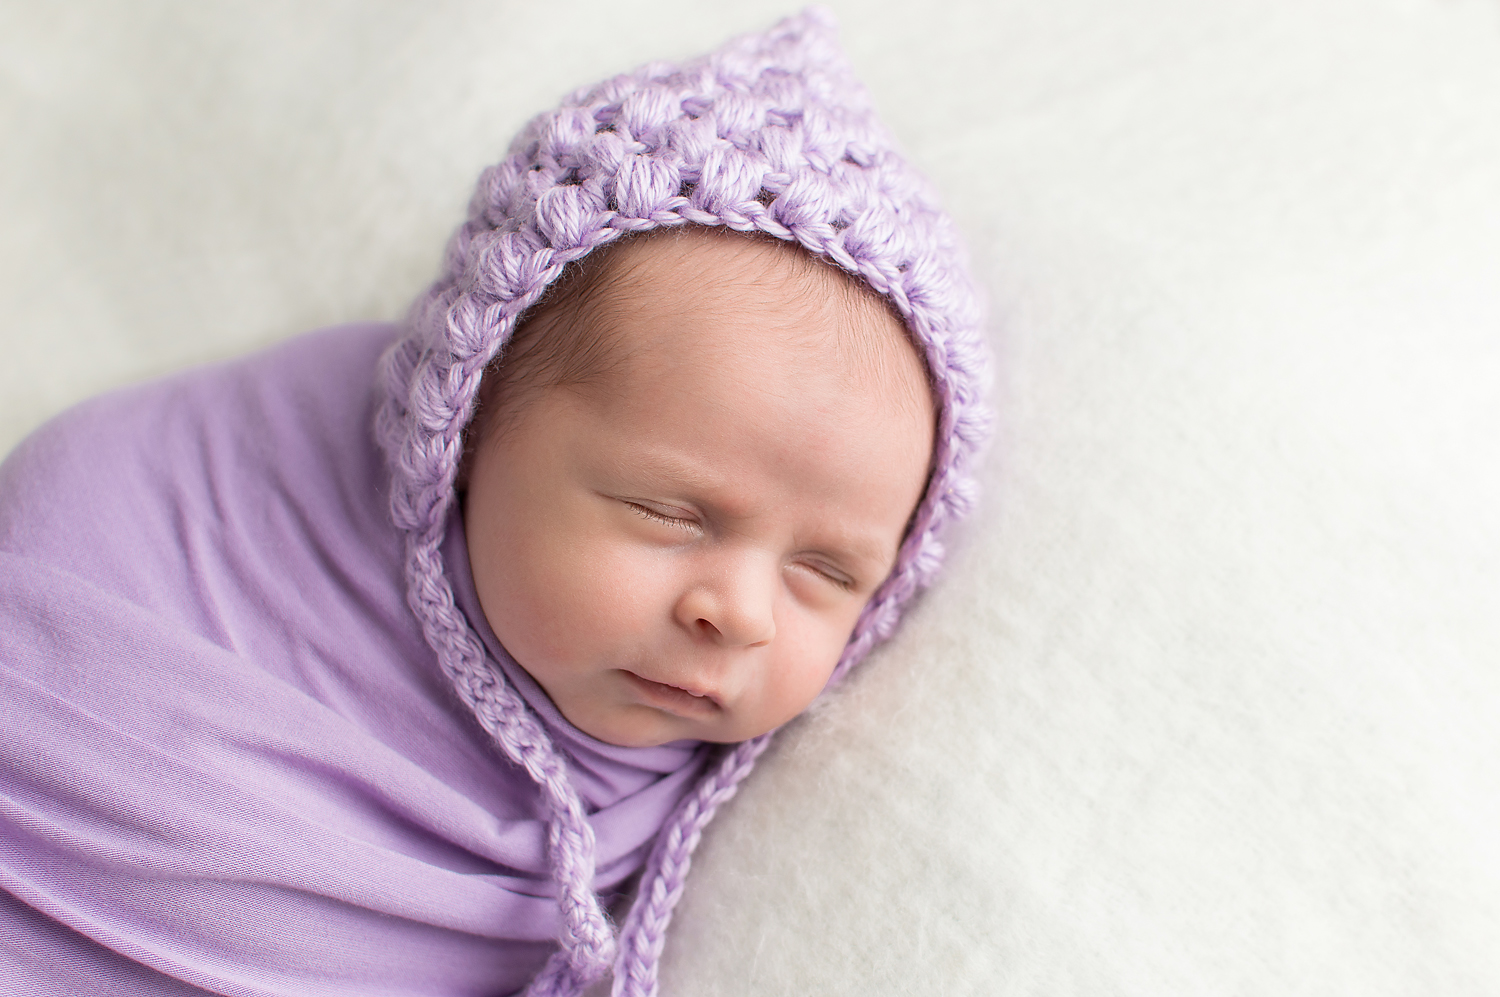 newborn baby wearing a purple bonnet and wrap-simple and clean minimalist-baby pics-photography near middleburg heights ohio.jpg